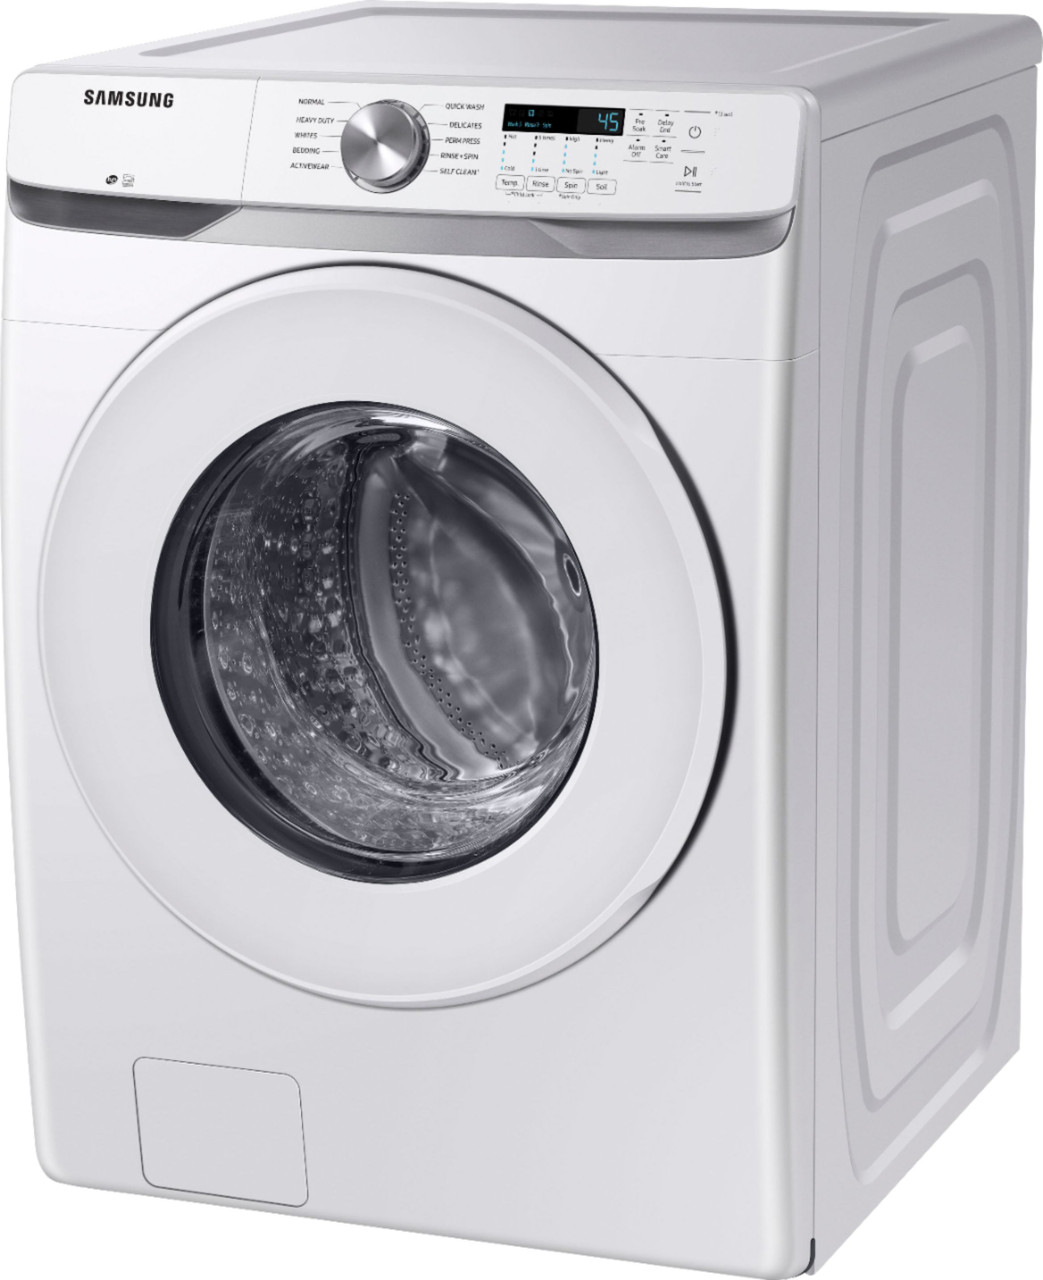 Samsung - 4.5 cu. ft. Front Load Washer with Vibration Reduction Technology+ - White